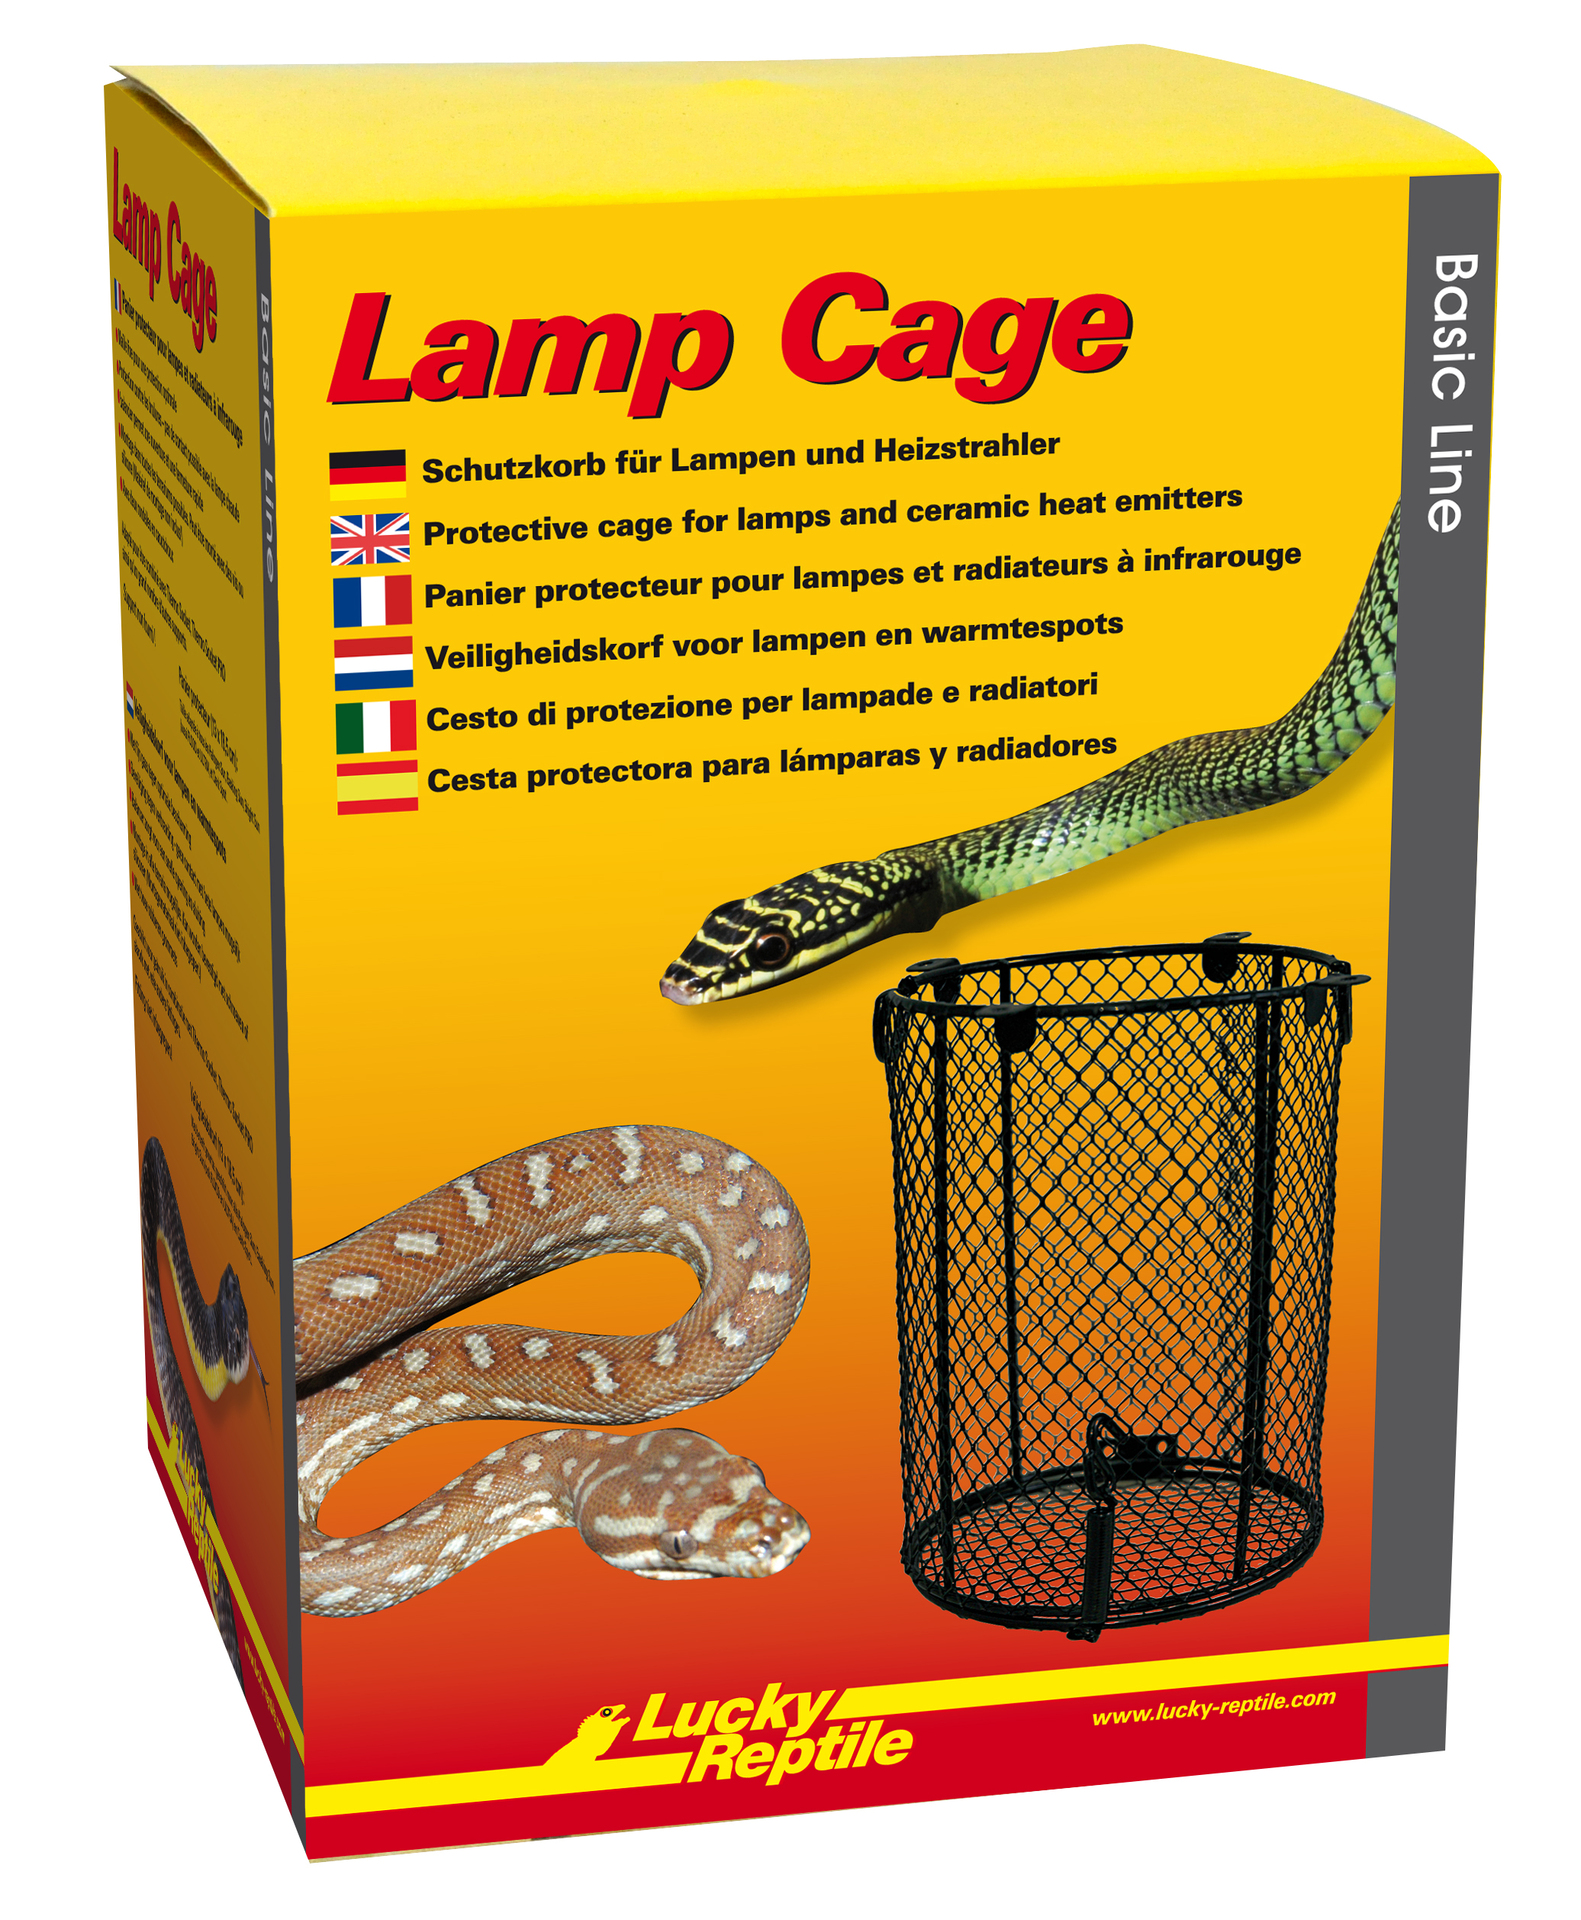 Import-Export Peter Hoch GmbH Lamp Cage